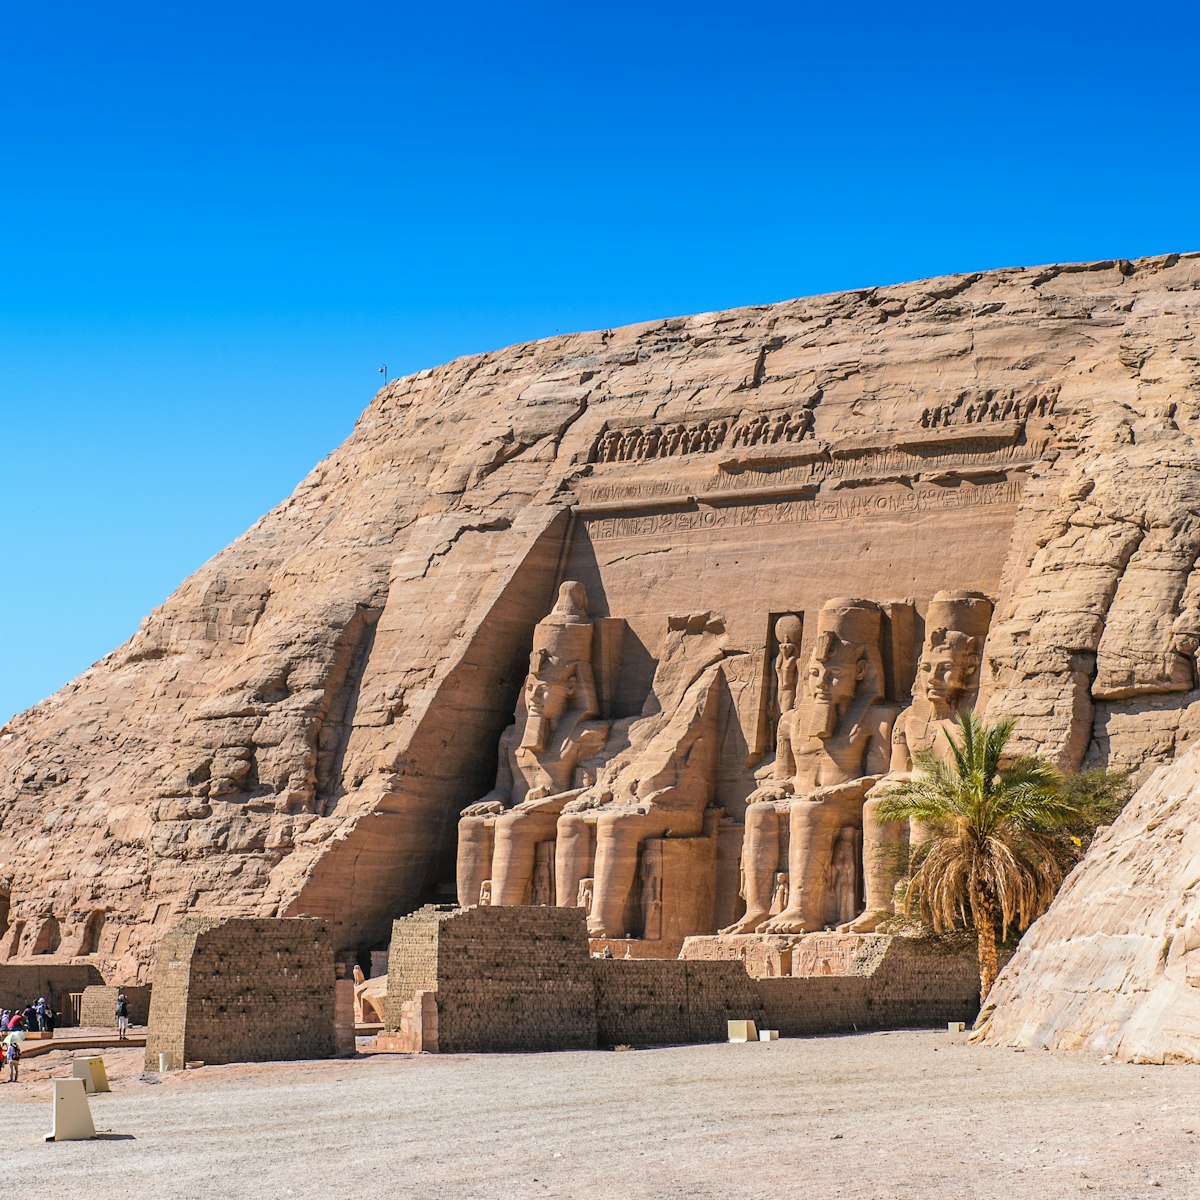 The Great Temple of Ramesses II, Abu Simbel.
236409301
archaeological, relief, tomb, stone, sculpture, travel, rock, statue, culture, landmark, queen, history, god, egypt, dynasty, africa, lake, nile, building, nasser, religious, tourist, historic, egyptian, enormous, ramses, nubian, world, unesco, aswan, famous, heritage, architecture, temple, king, pharaoh, highlight, desert, religion, ancient, monument, colossus, memorial, archaeology, faraon, ramesses, abu, simbel, nefertari, faraonic